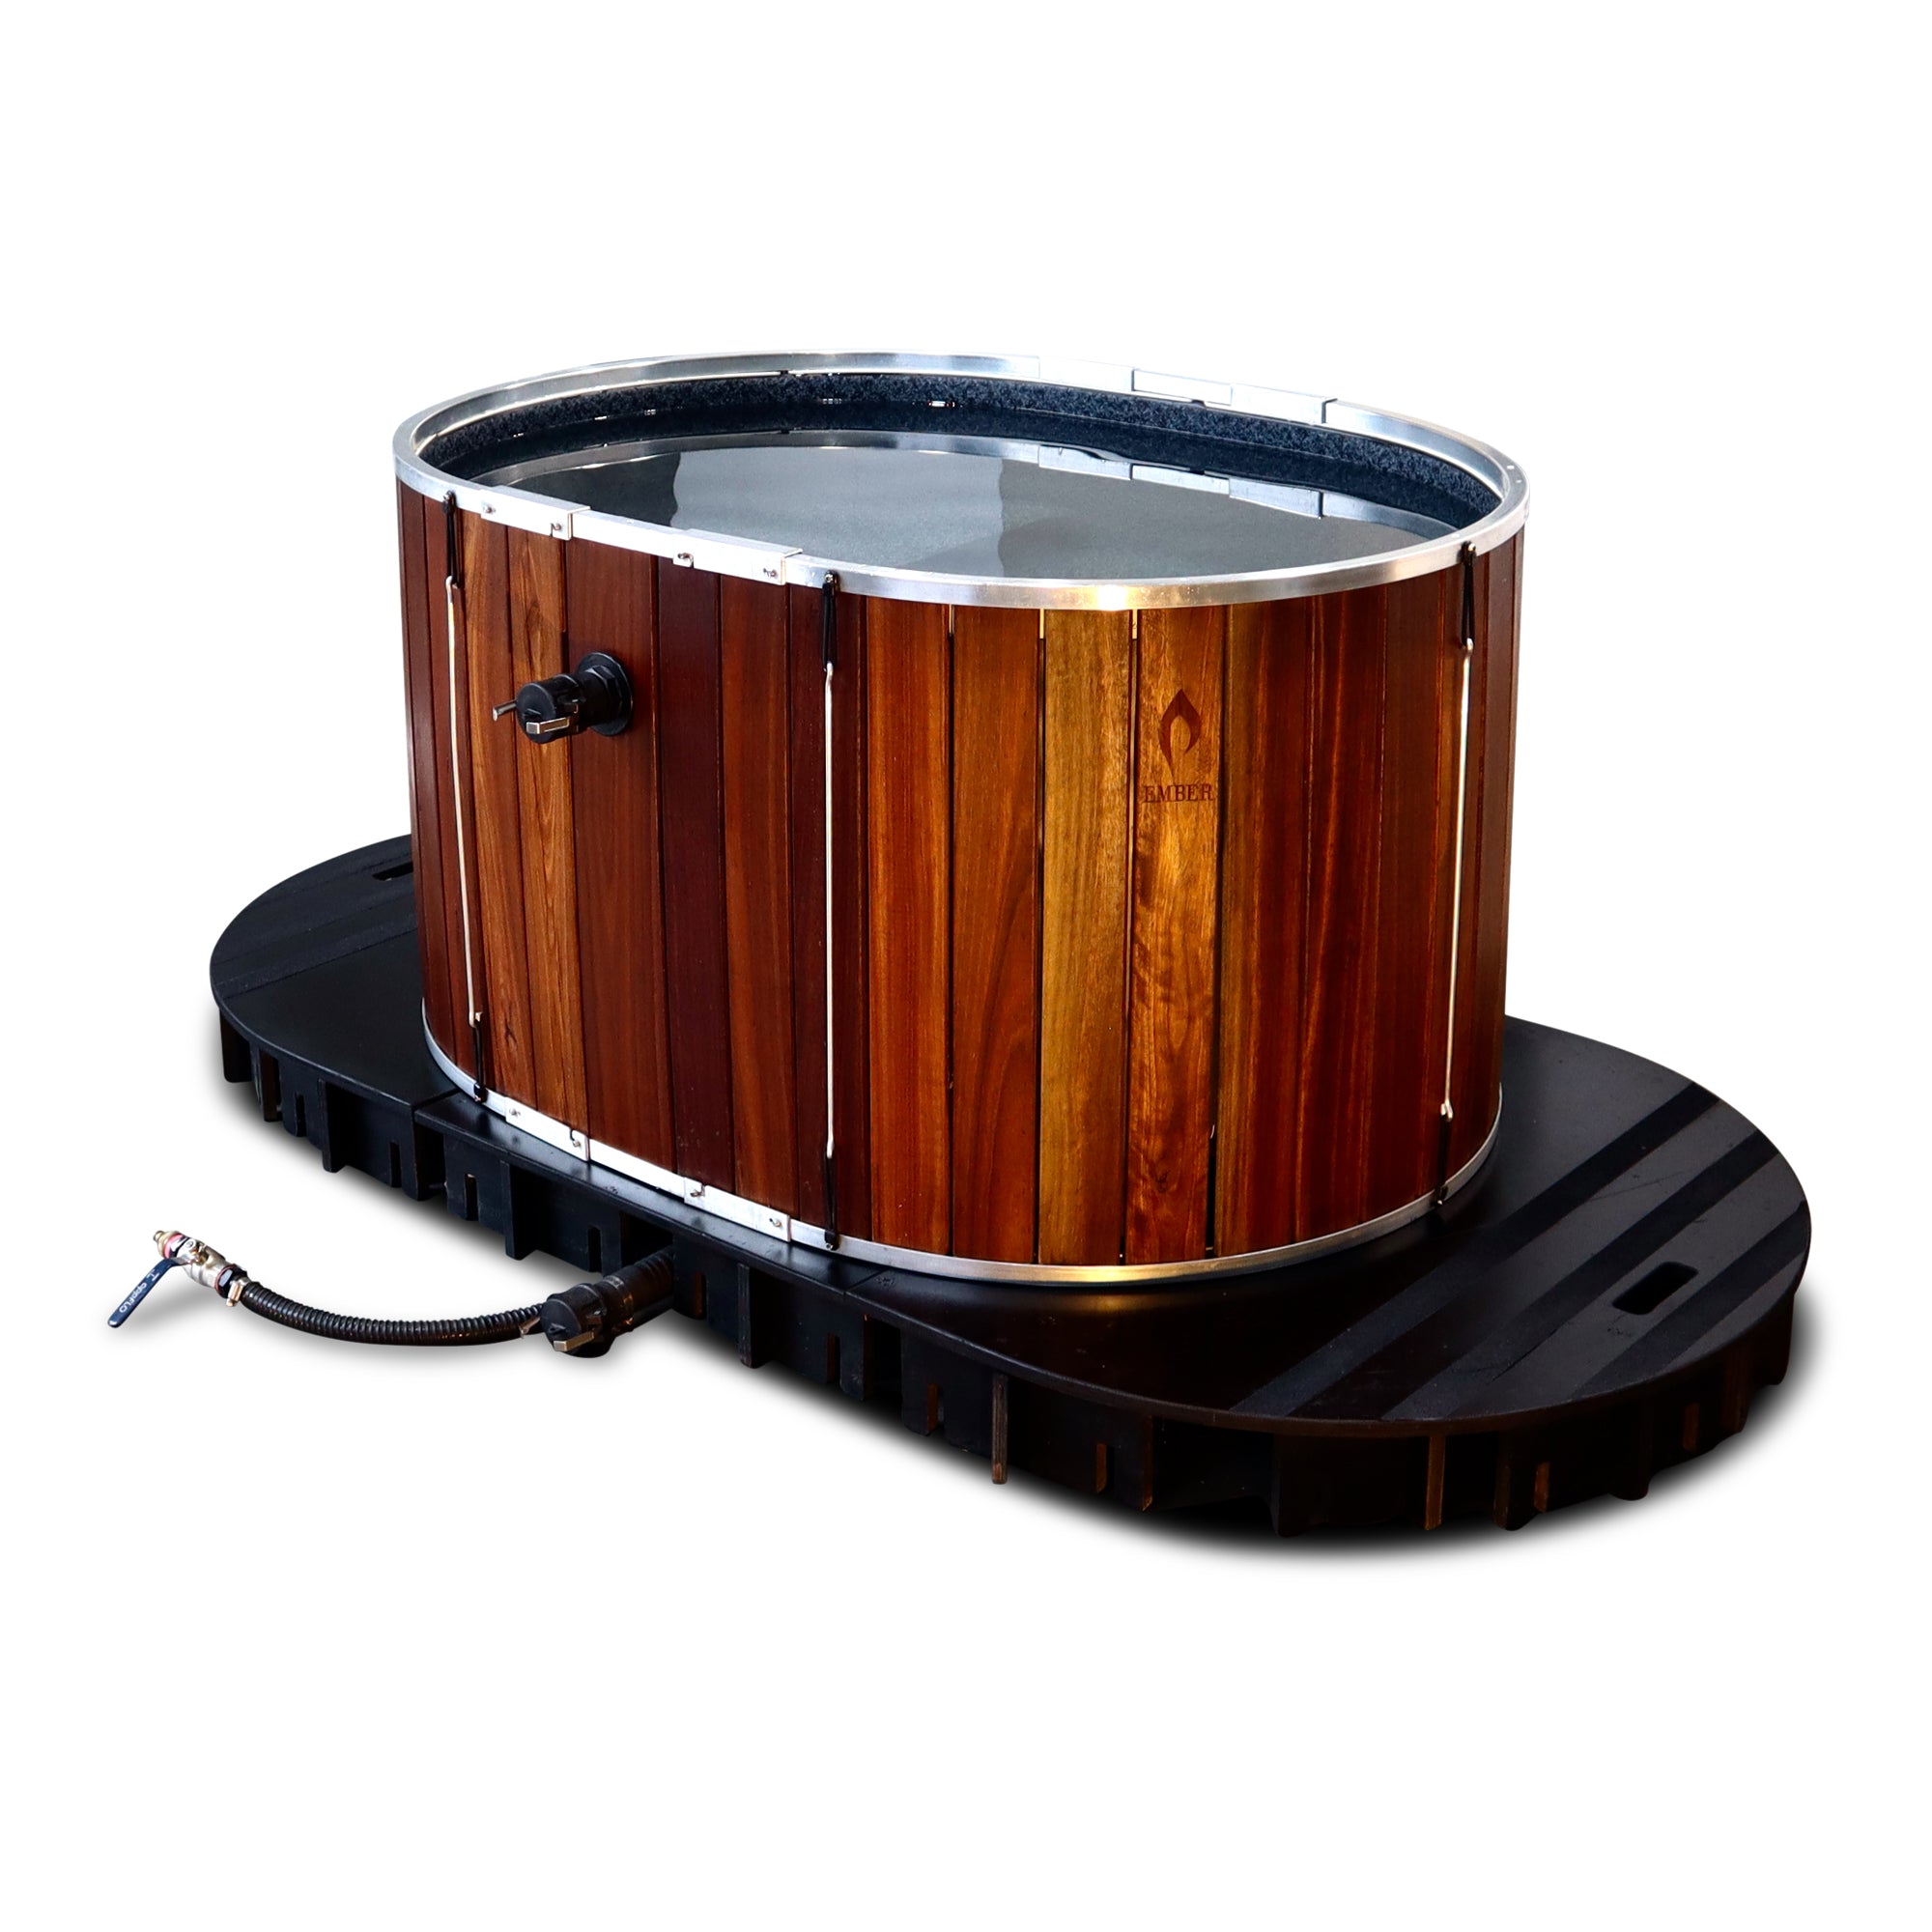 Wood-Fired Hot Tub - Small (1.5m Oval)